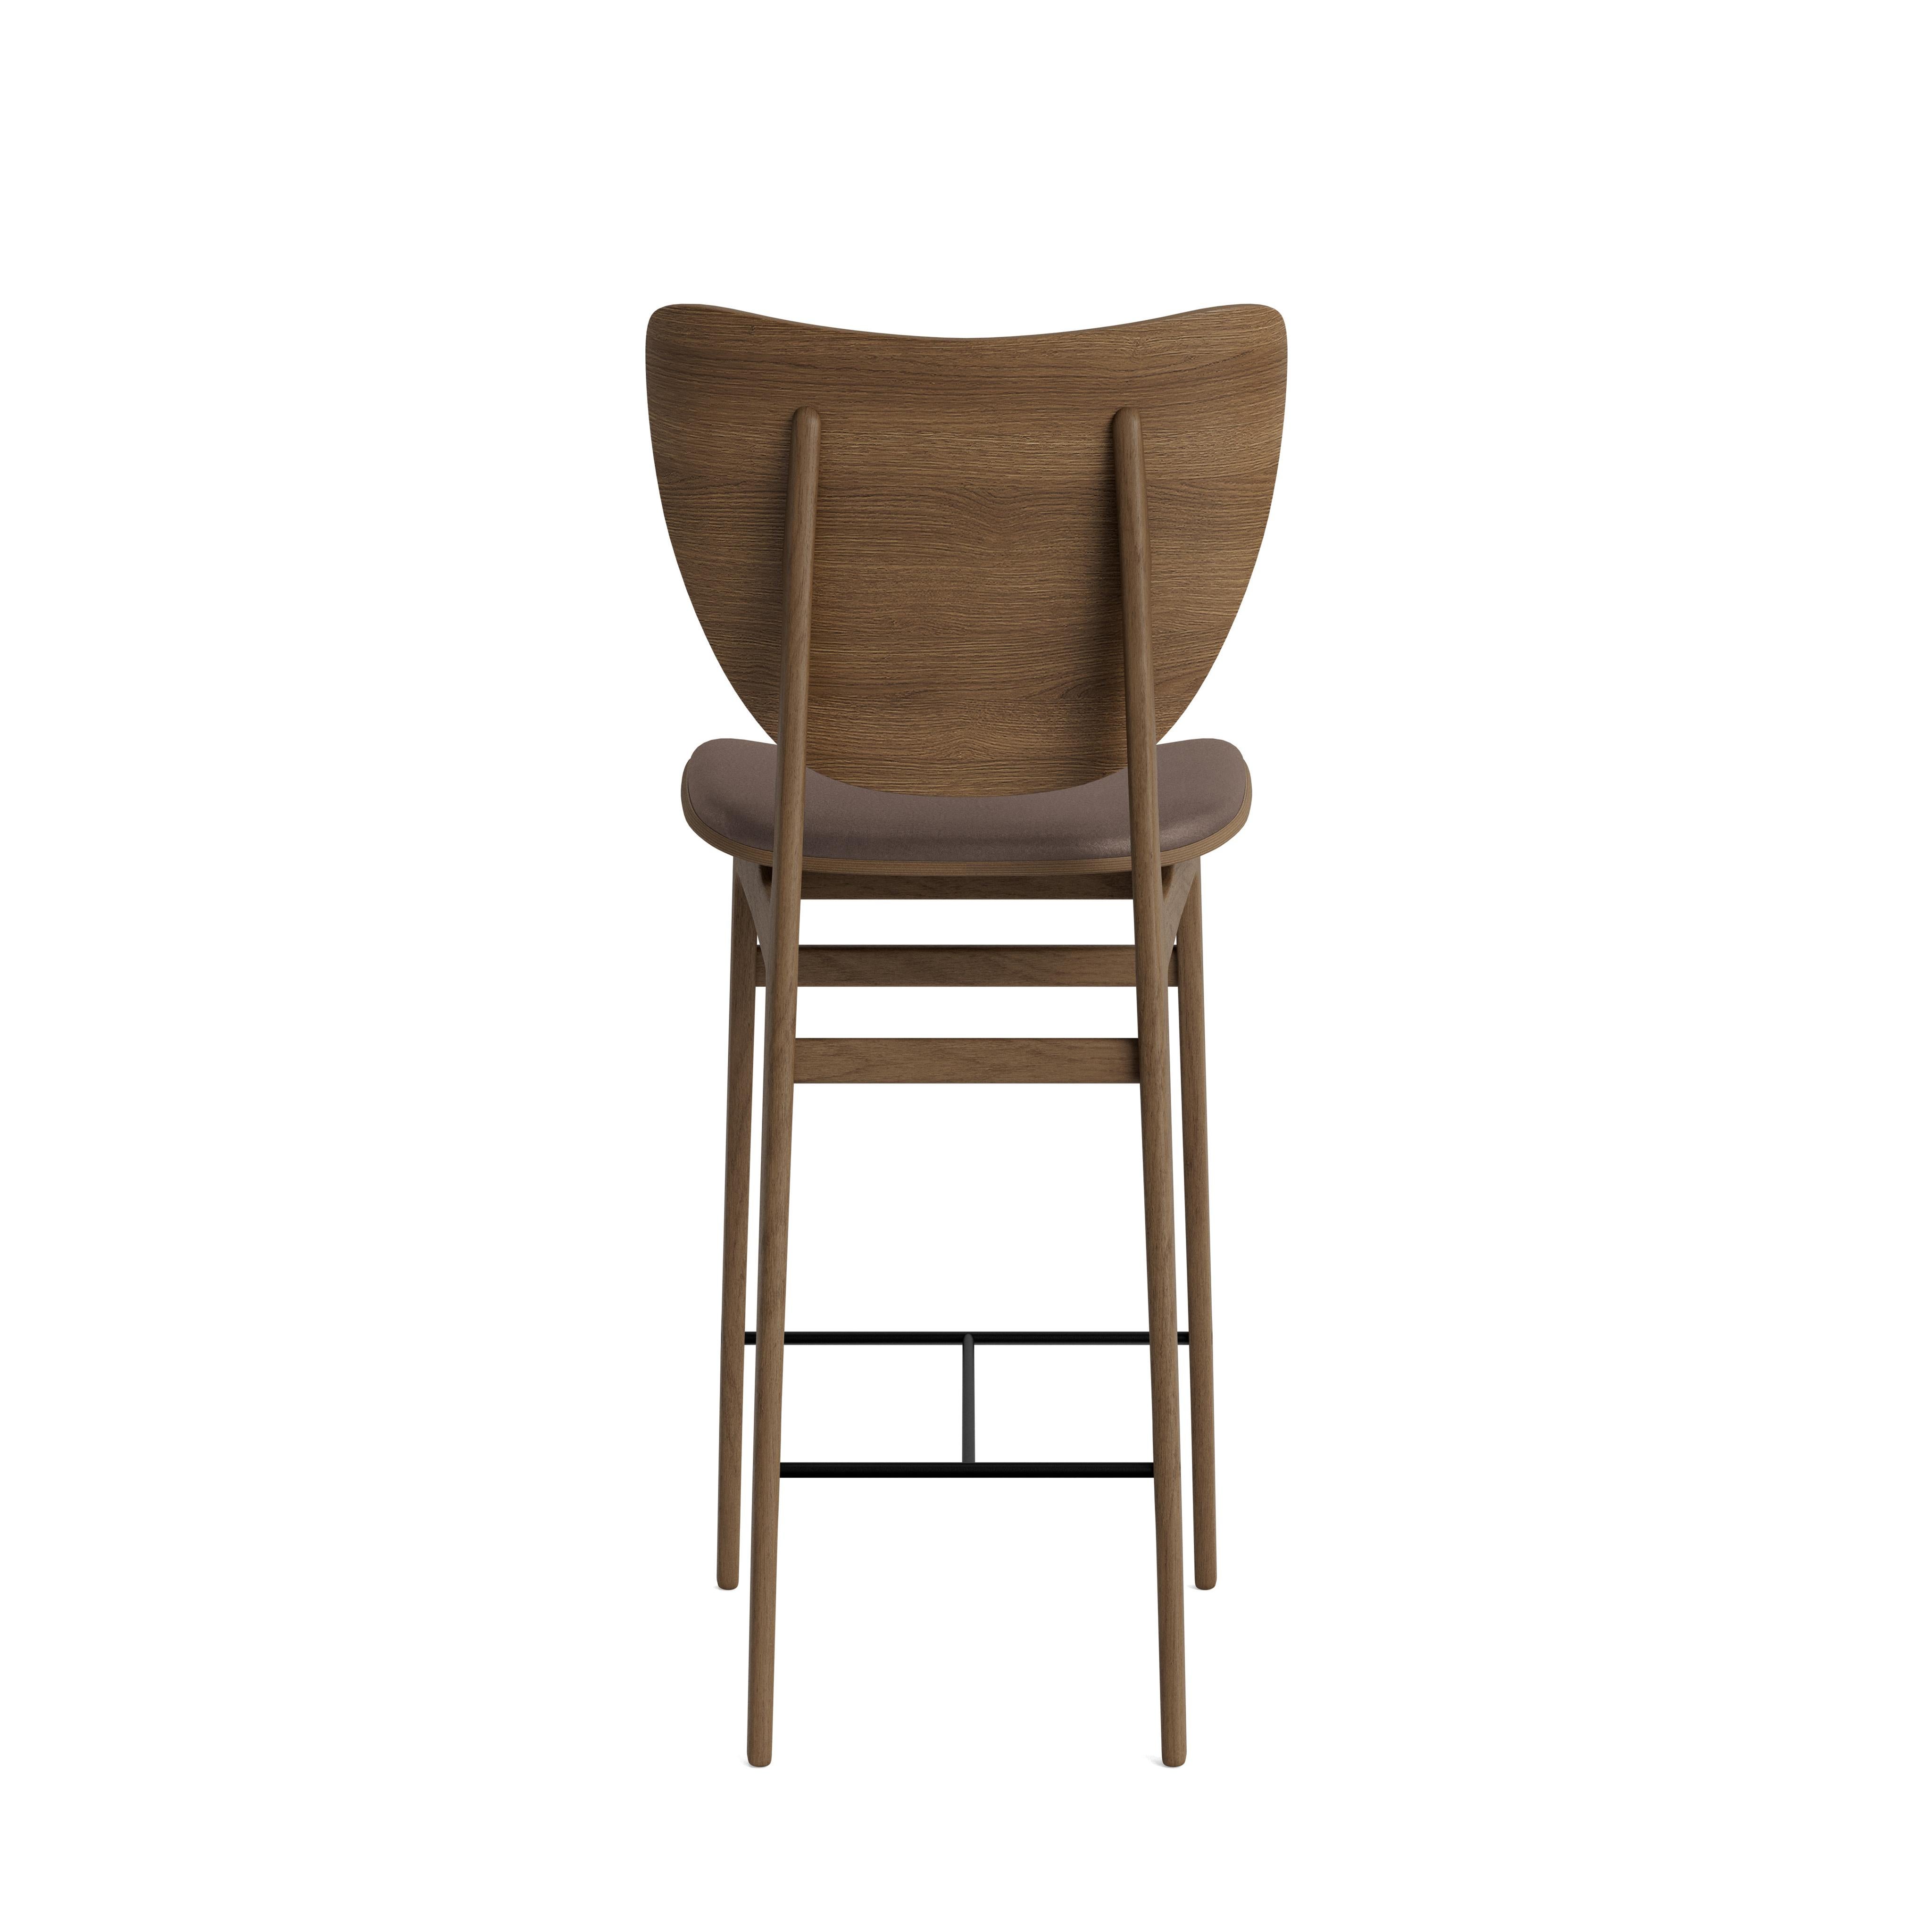 Elephant Bar Chair
Signed by Rune Krøjgaard & Knut Bendik Humlevik for Norr11. 

Dimensions: H. 101 cm x W. 46 cm x 52 cm SH. 65 cm

Model shown on the picture:
Wood: Light Smoked oak
Fabric: Leather Dunes Dark brown 21001

Wood types